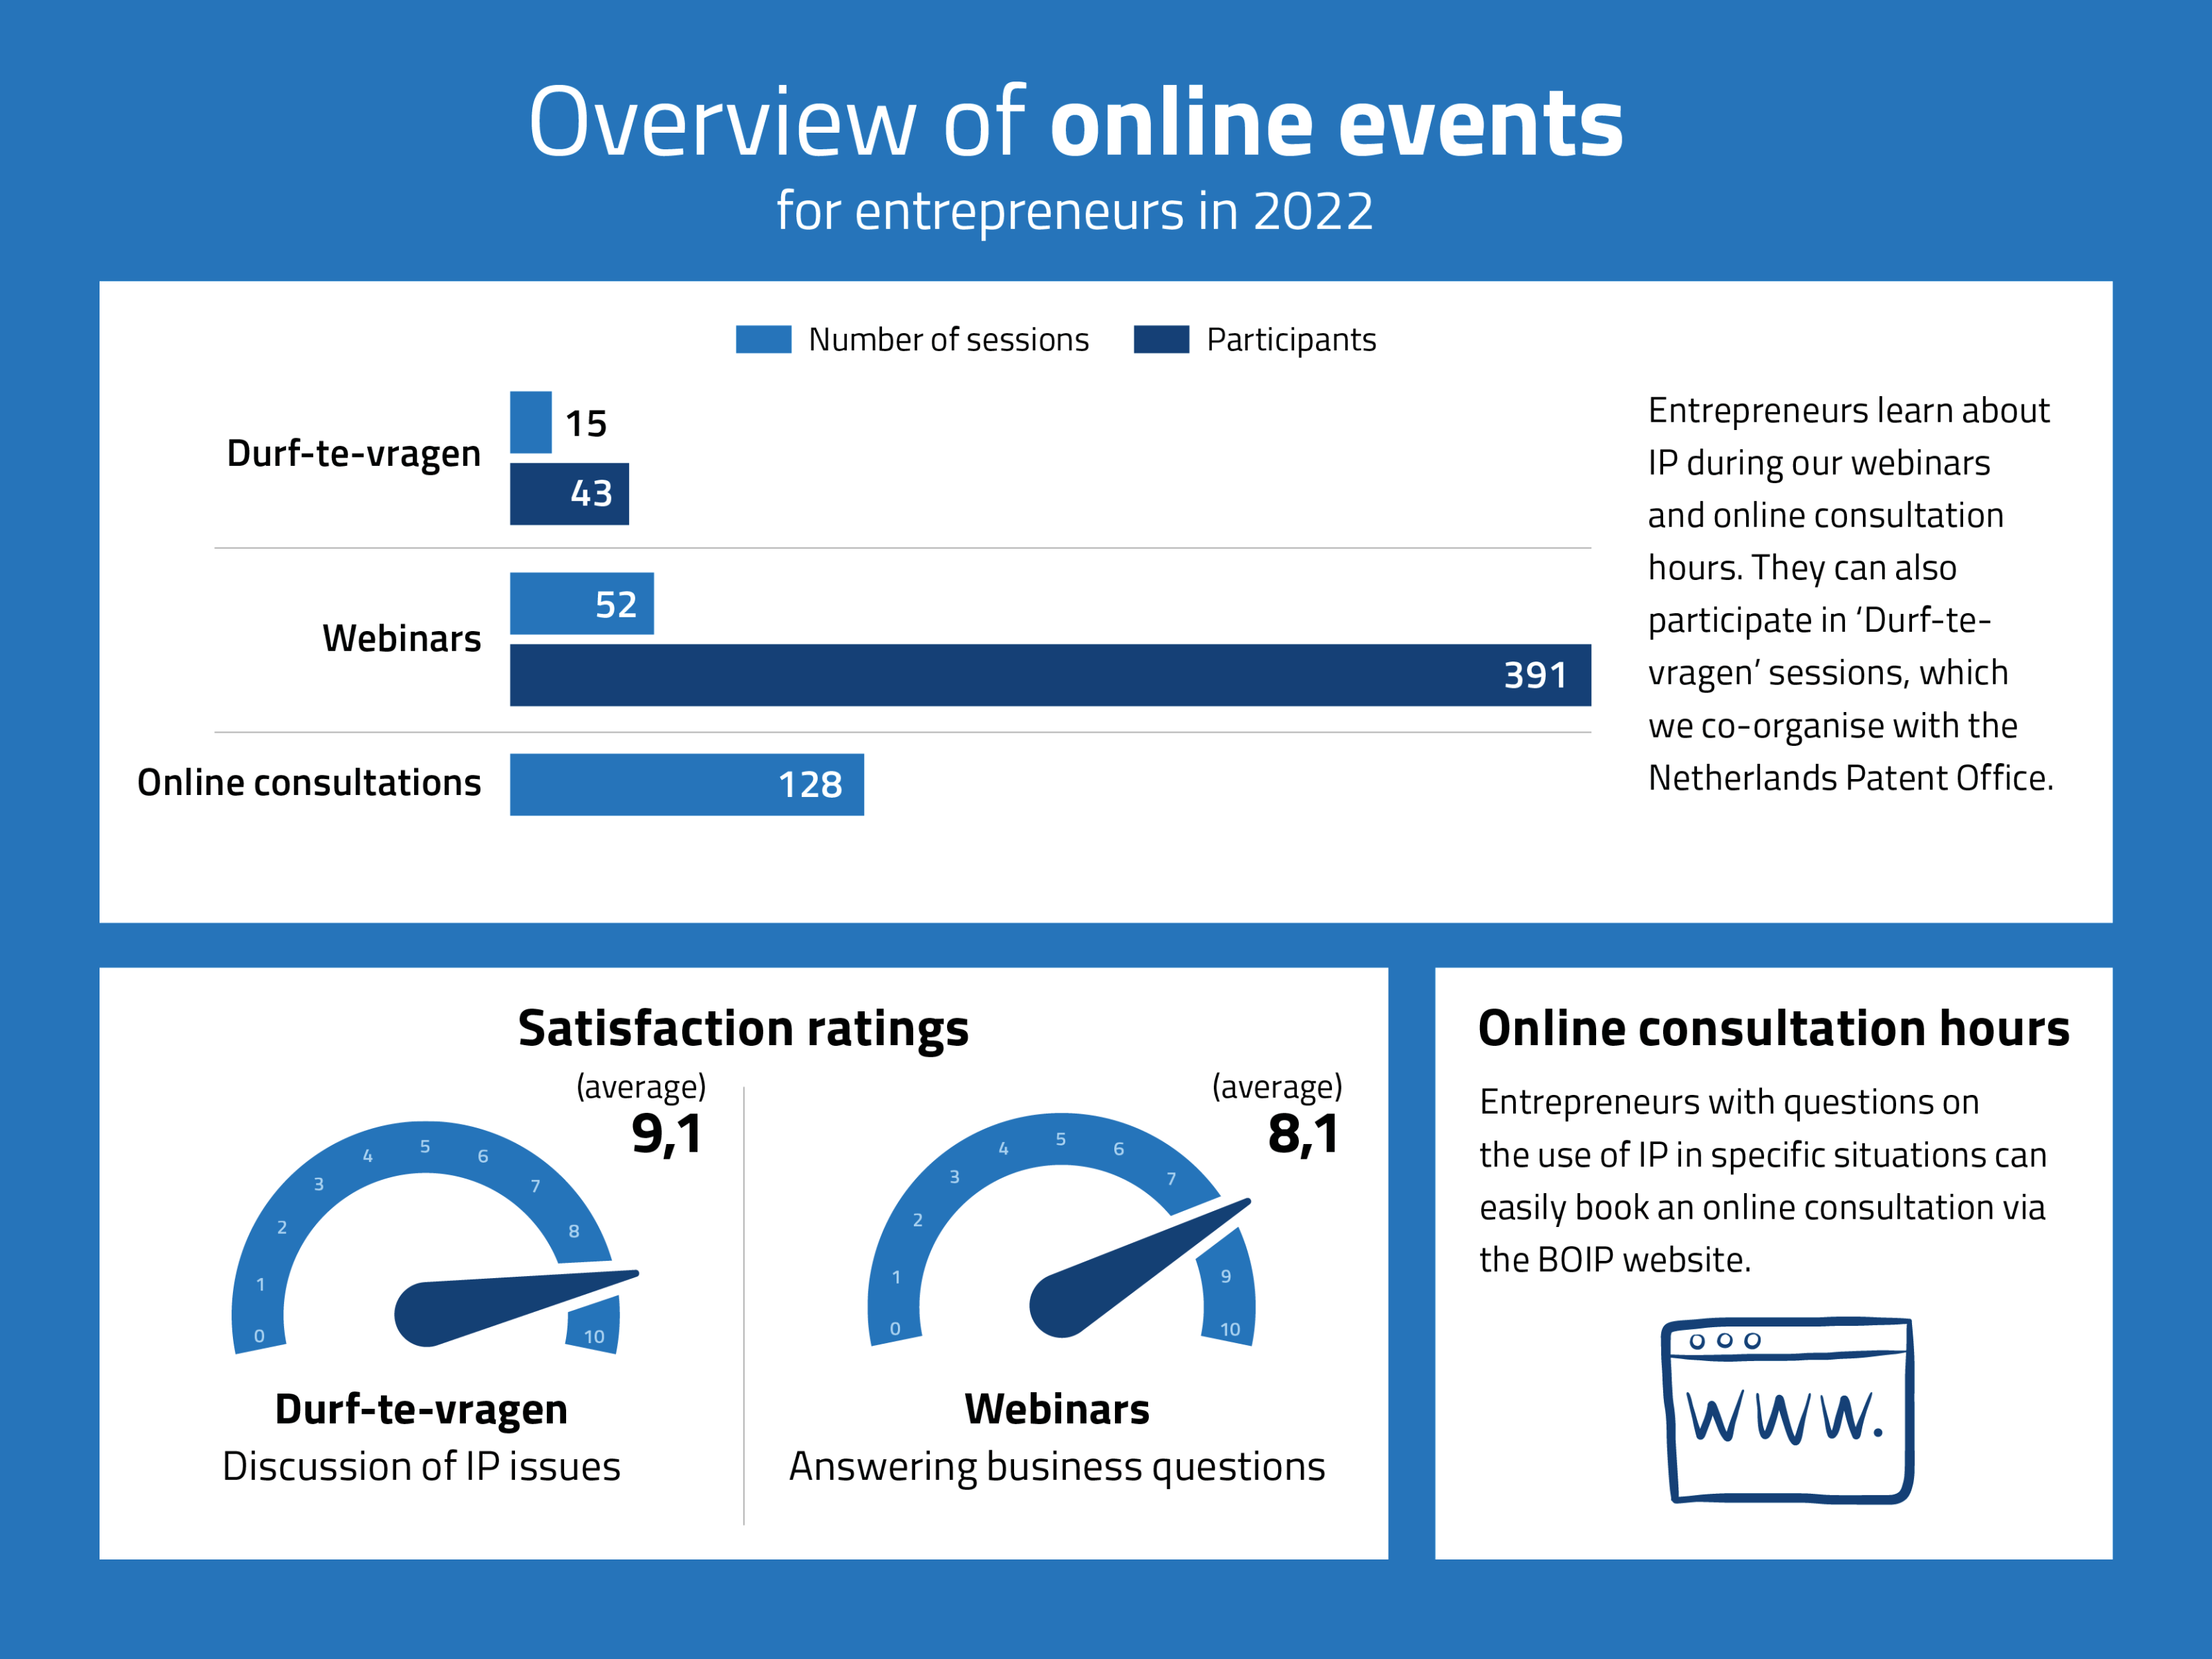 Infographic overview of online events entrepreneurs 2022. Key results: webinars have 391 participants, dare-to-ask sessions get a 9.1 rating and webinars thread an 8.1 rating.